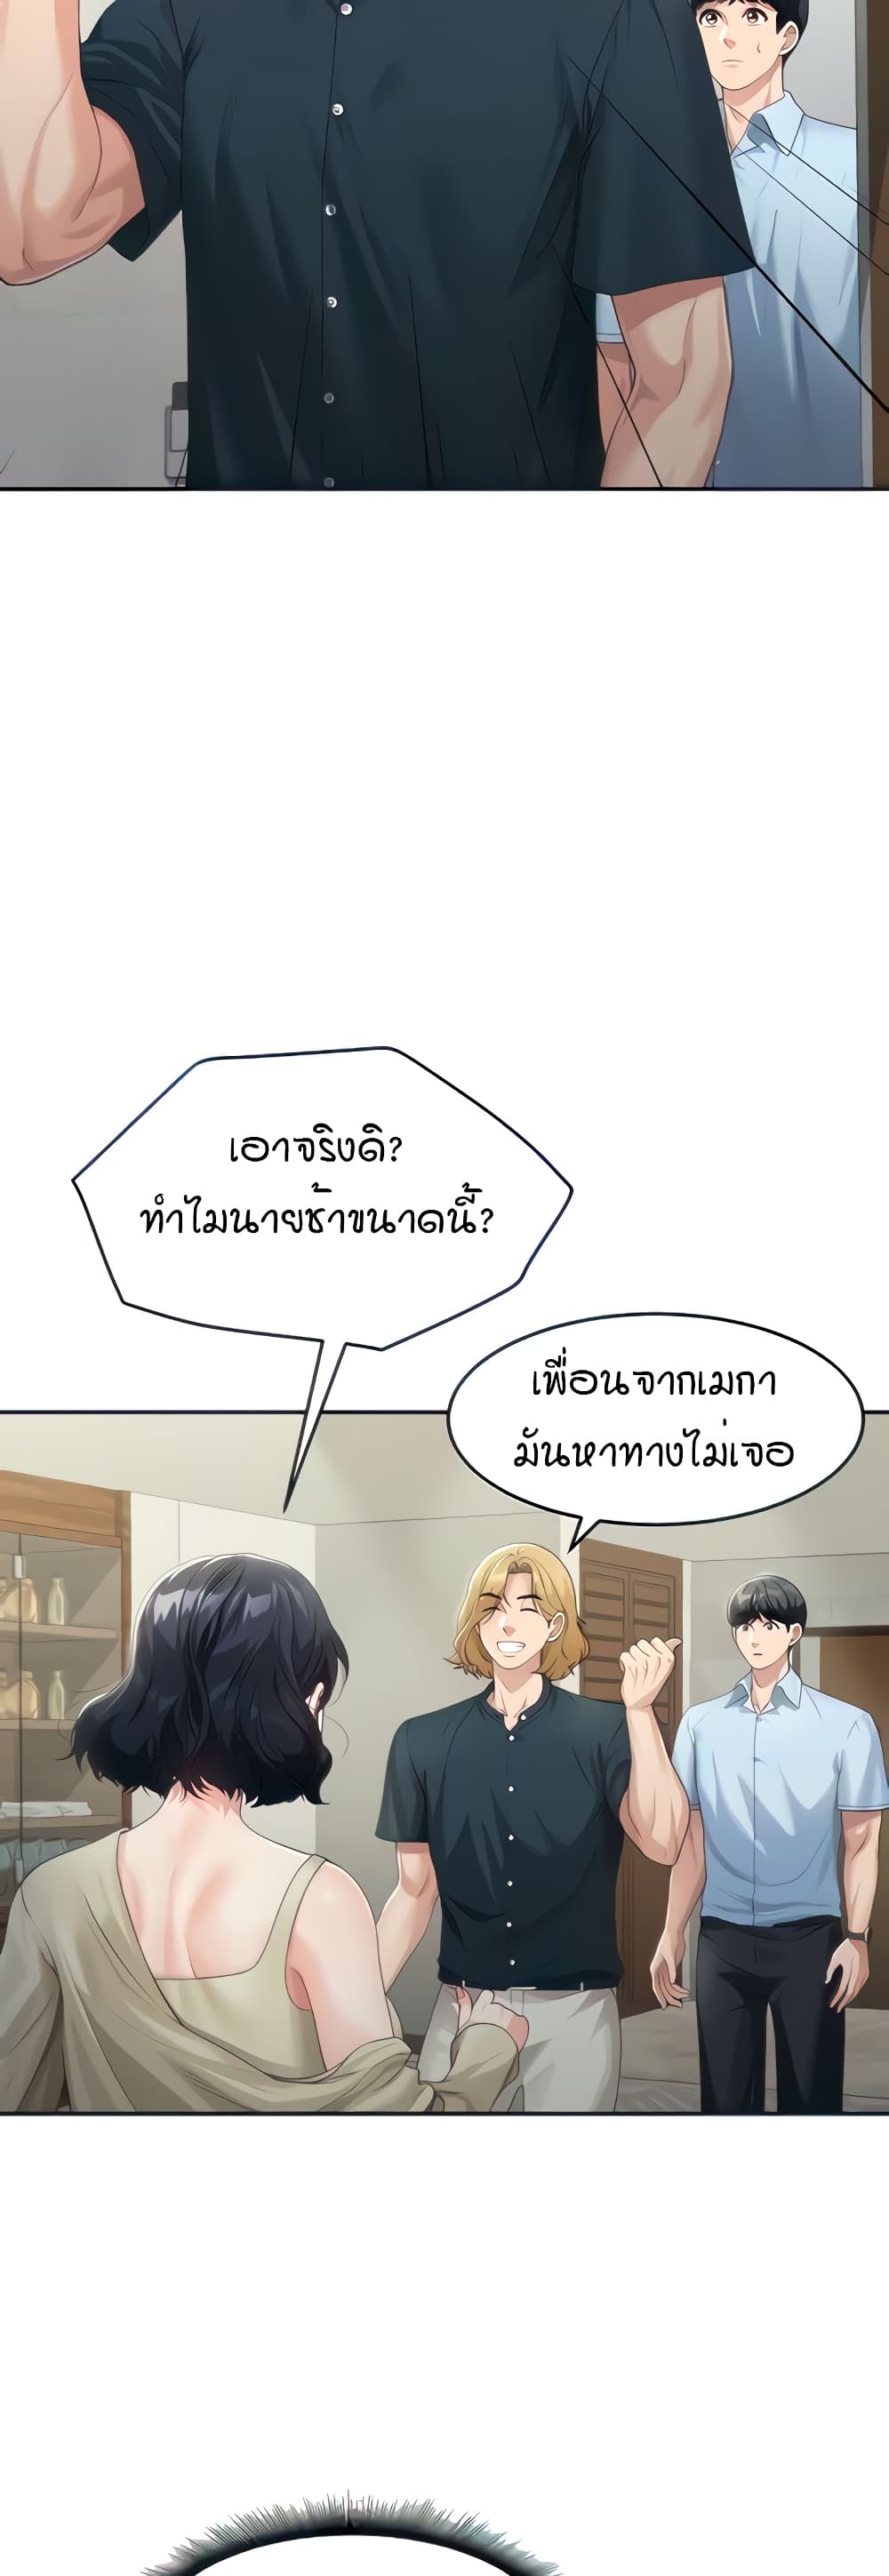 Is It Your Mother or Sister? ตอนที่ 2 ภาพ 25